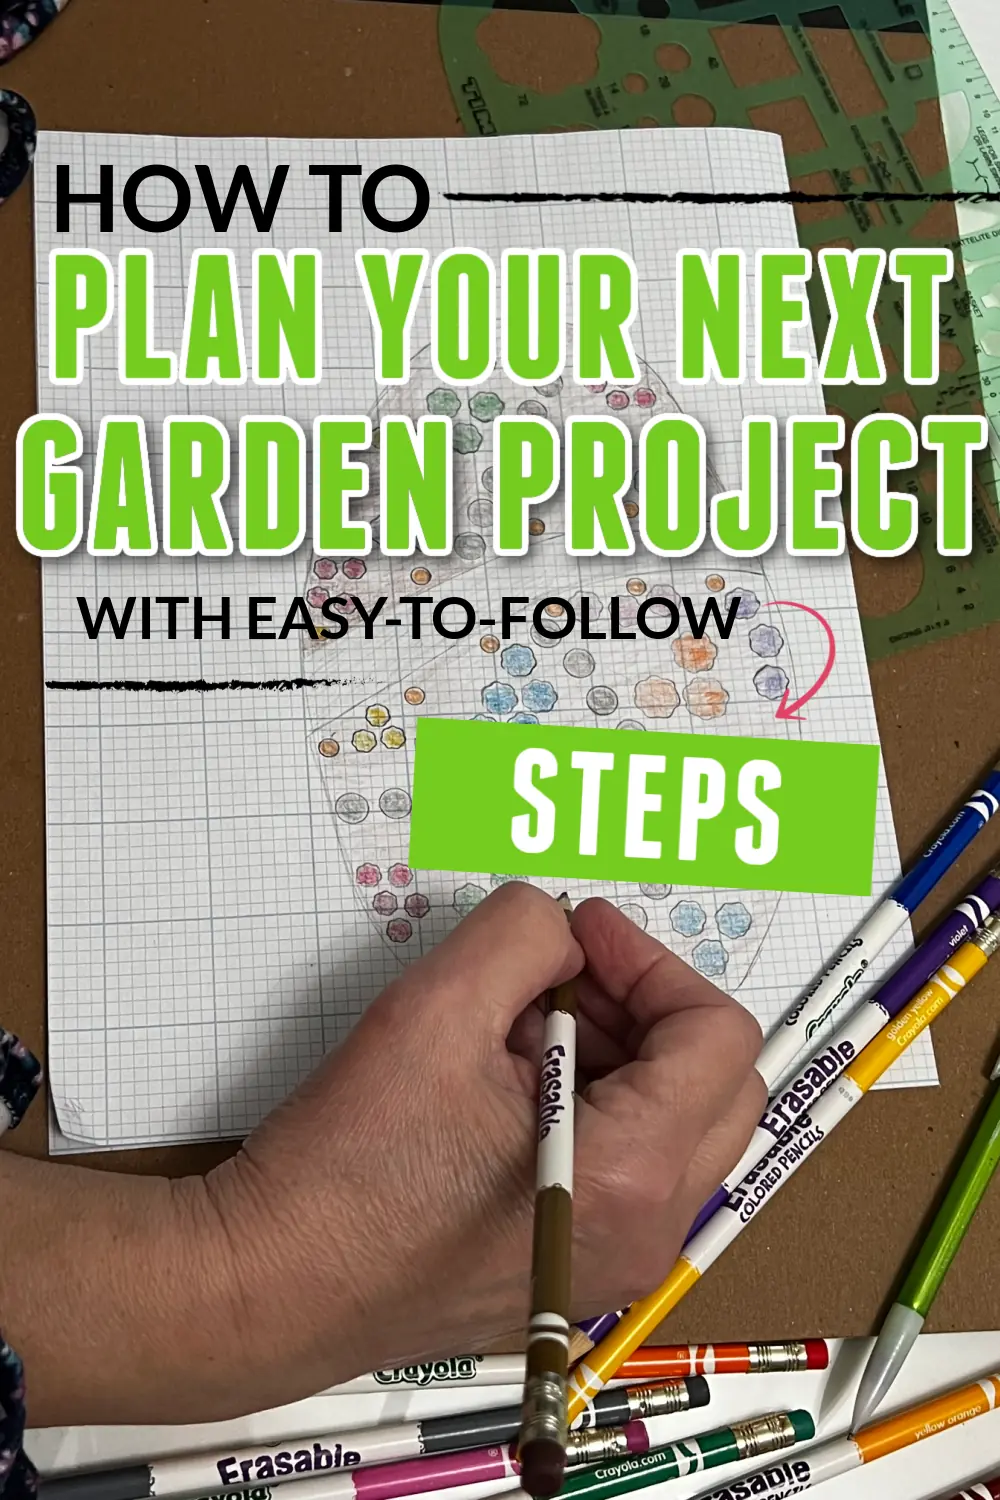 Image of a gardener drawing a garden plan with colored pencils with text overlay - How to Plan Your Next Garden Project with easy-to-follow steps.